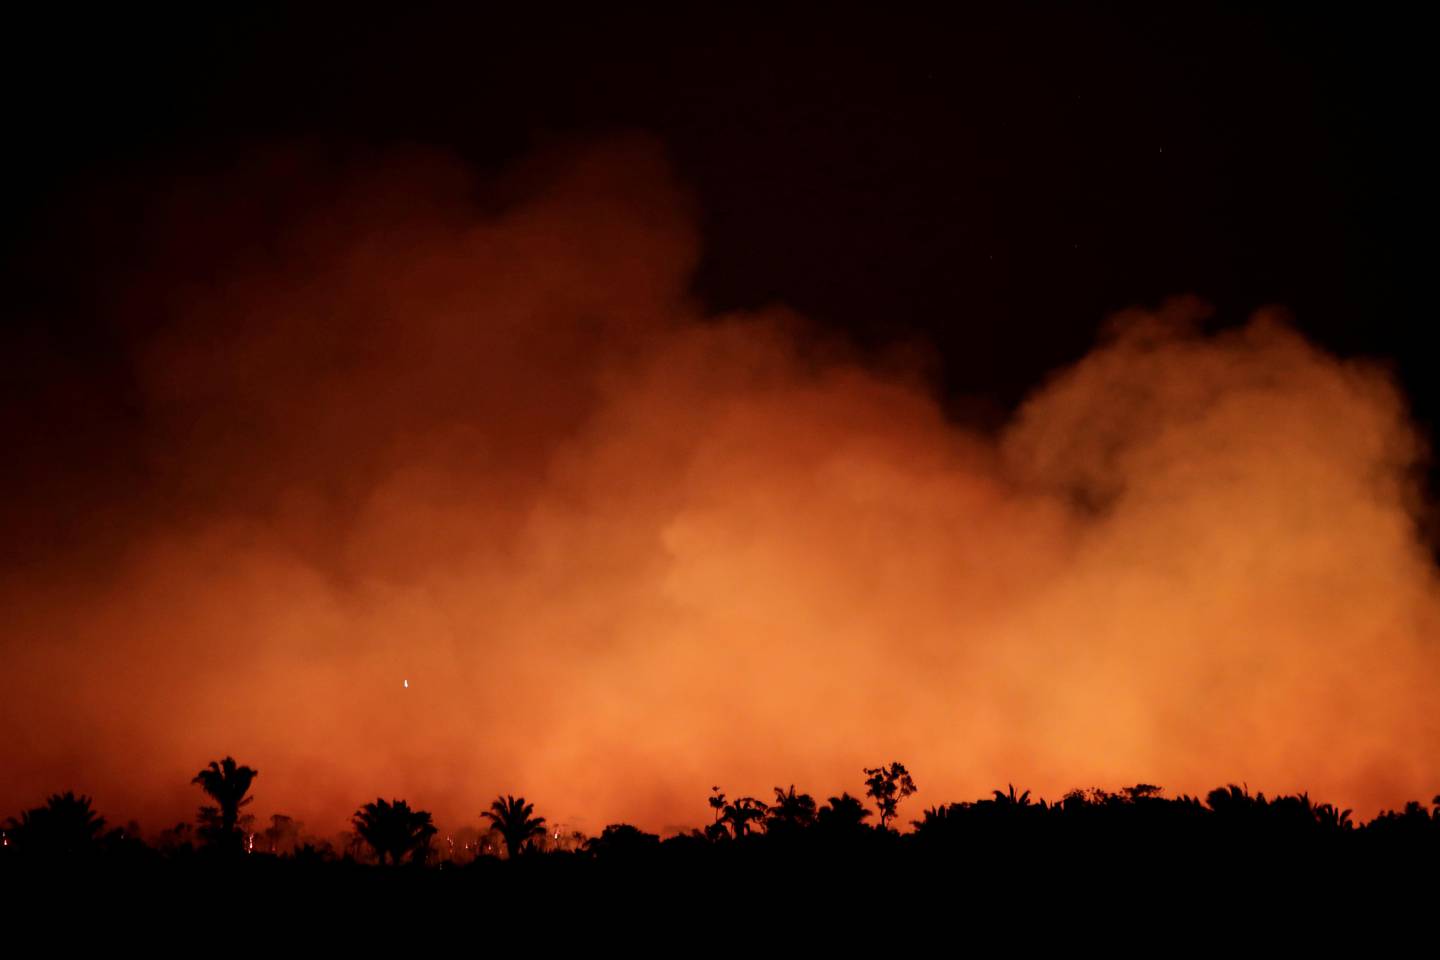 FILE PHOTO: Smoke billows during a fire in an area of the Amazon rainforest near Humaita, Amazonas State, Brazil, Brazil August 17, 2019. Picture Taken August 17, 2019. REUTERS/Ueslei Marcelino/File Photo